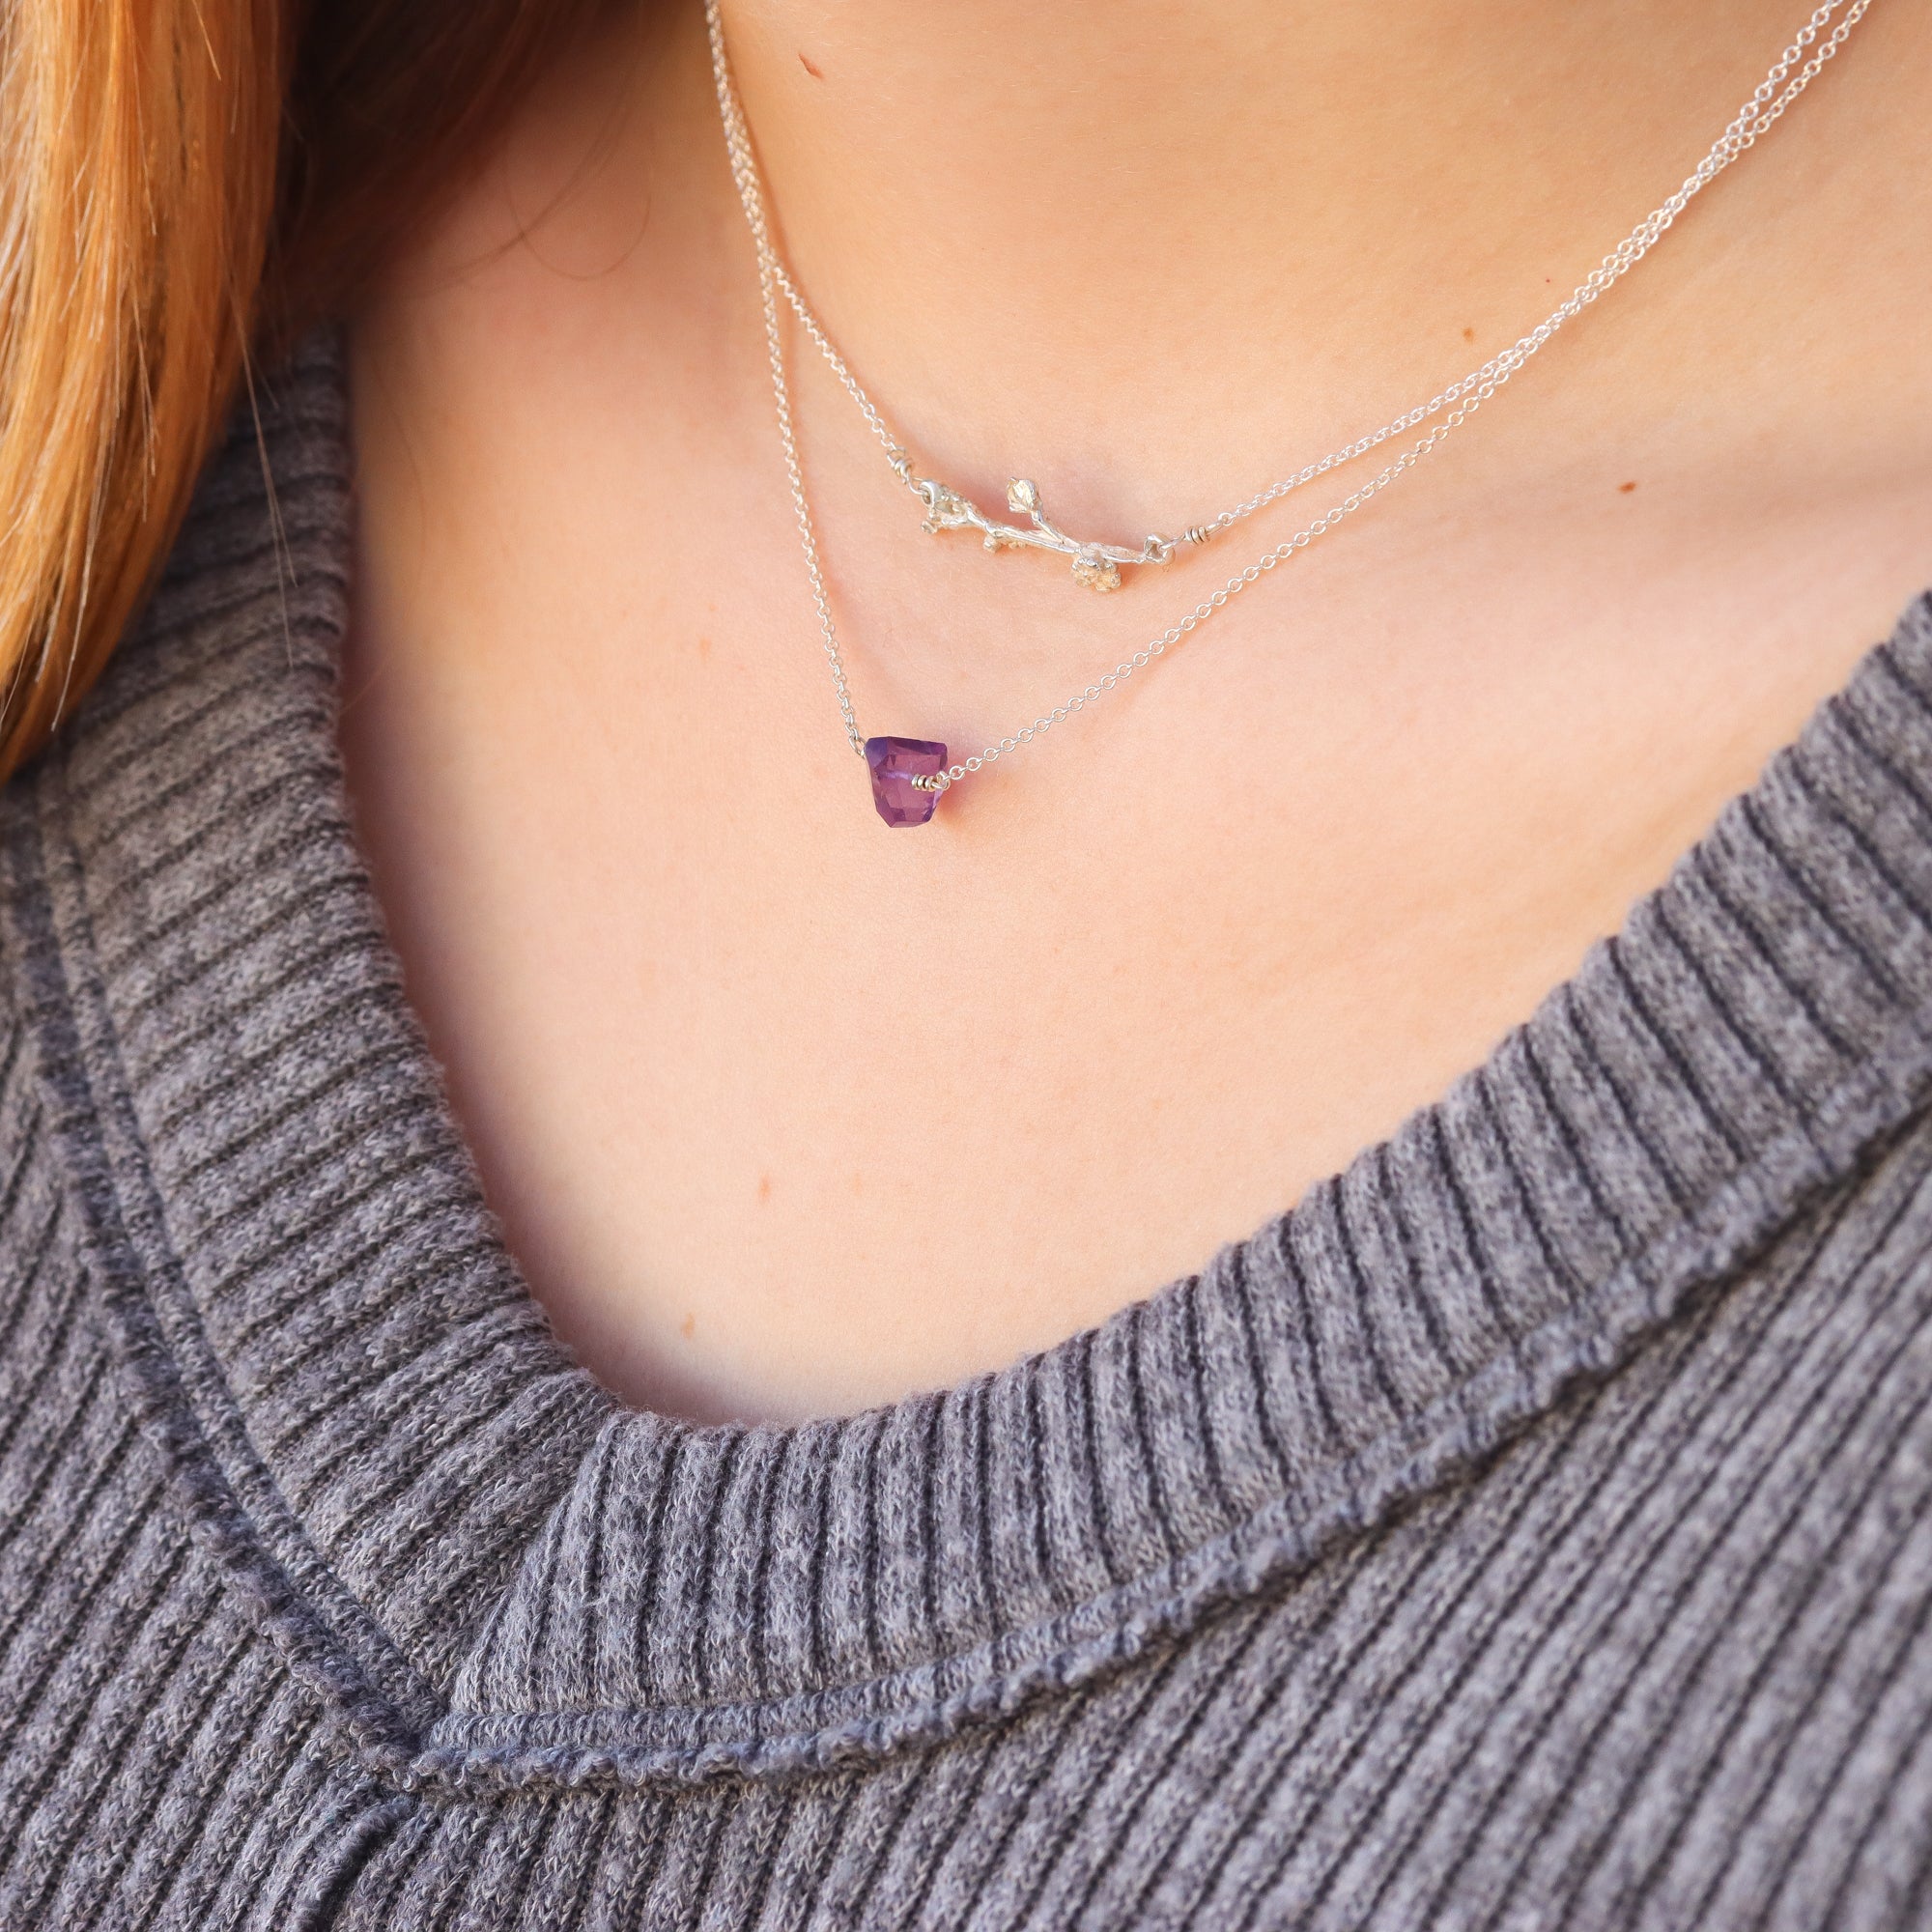 Small Amethyst Solitaire